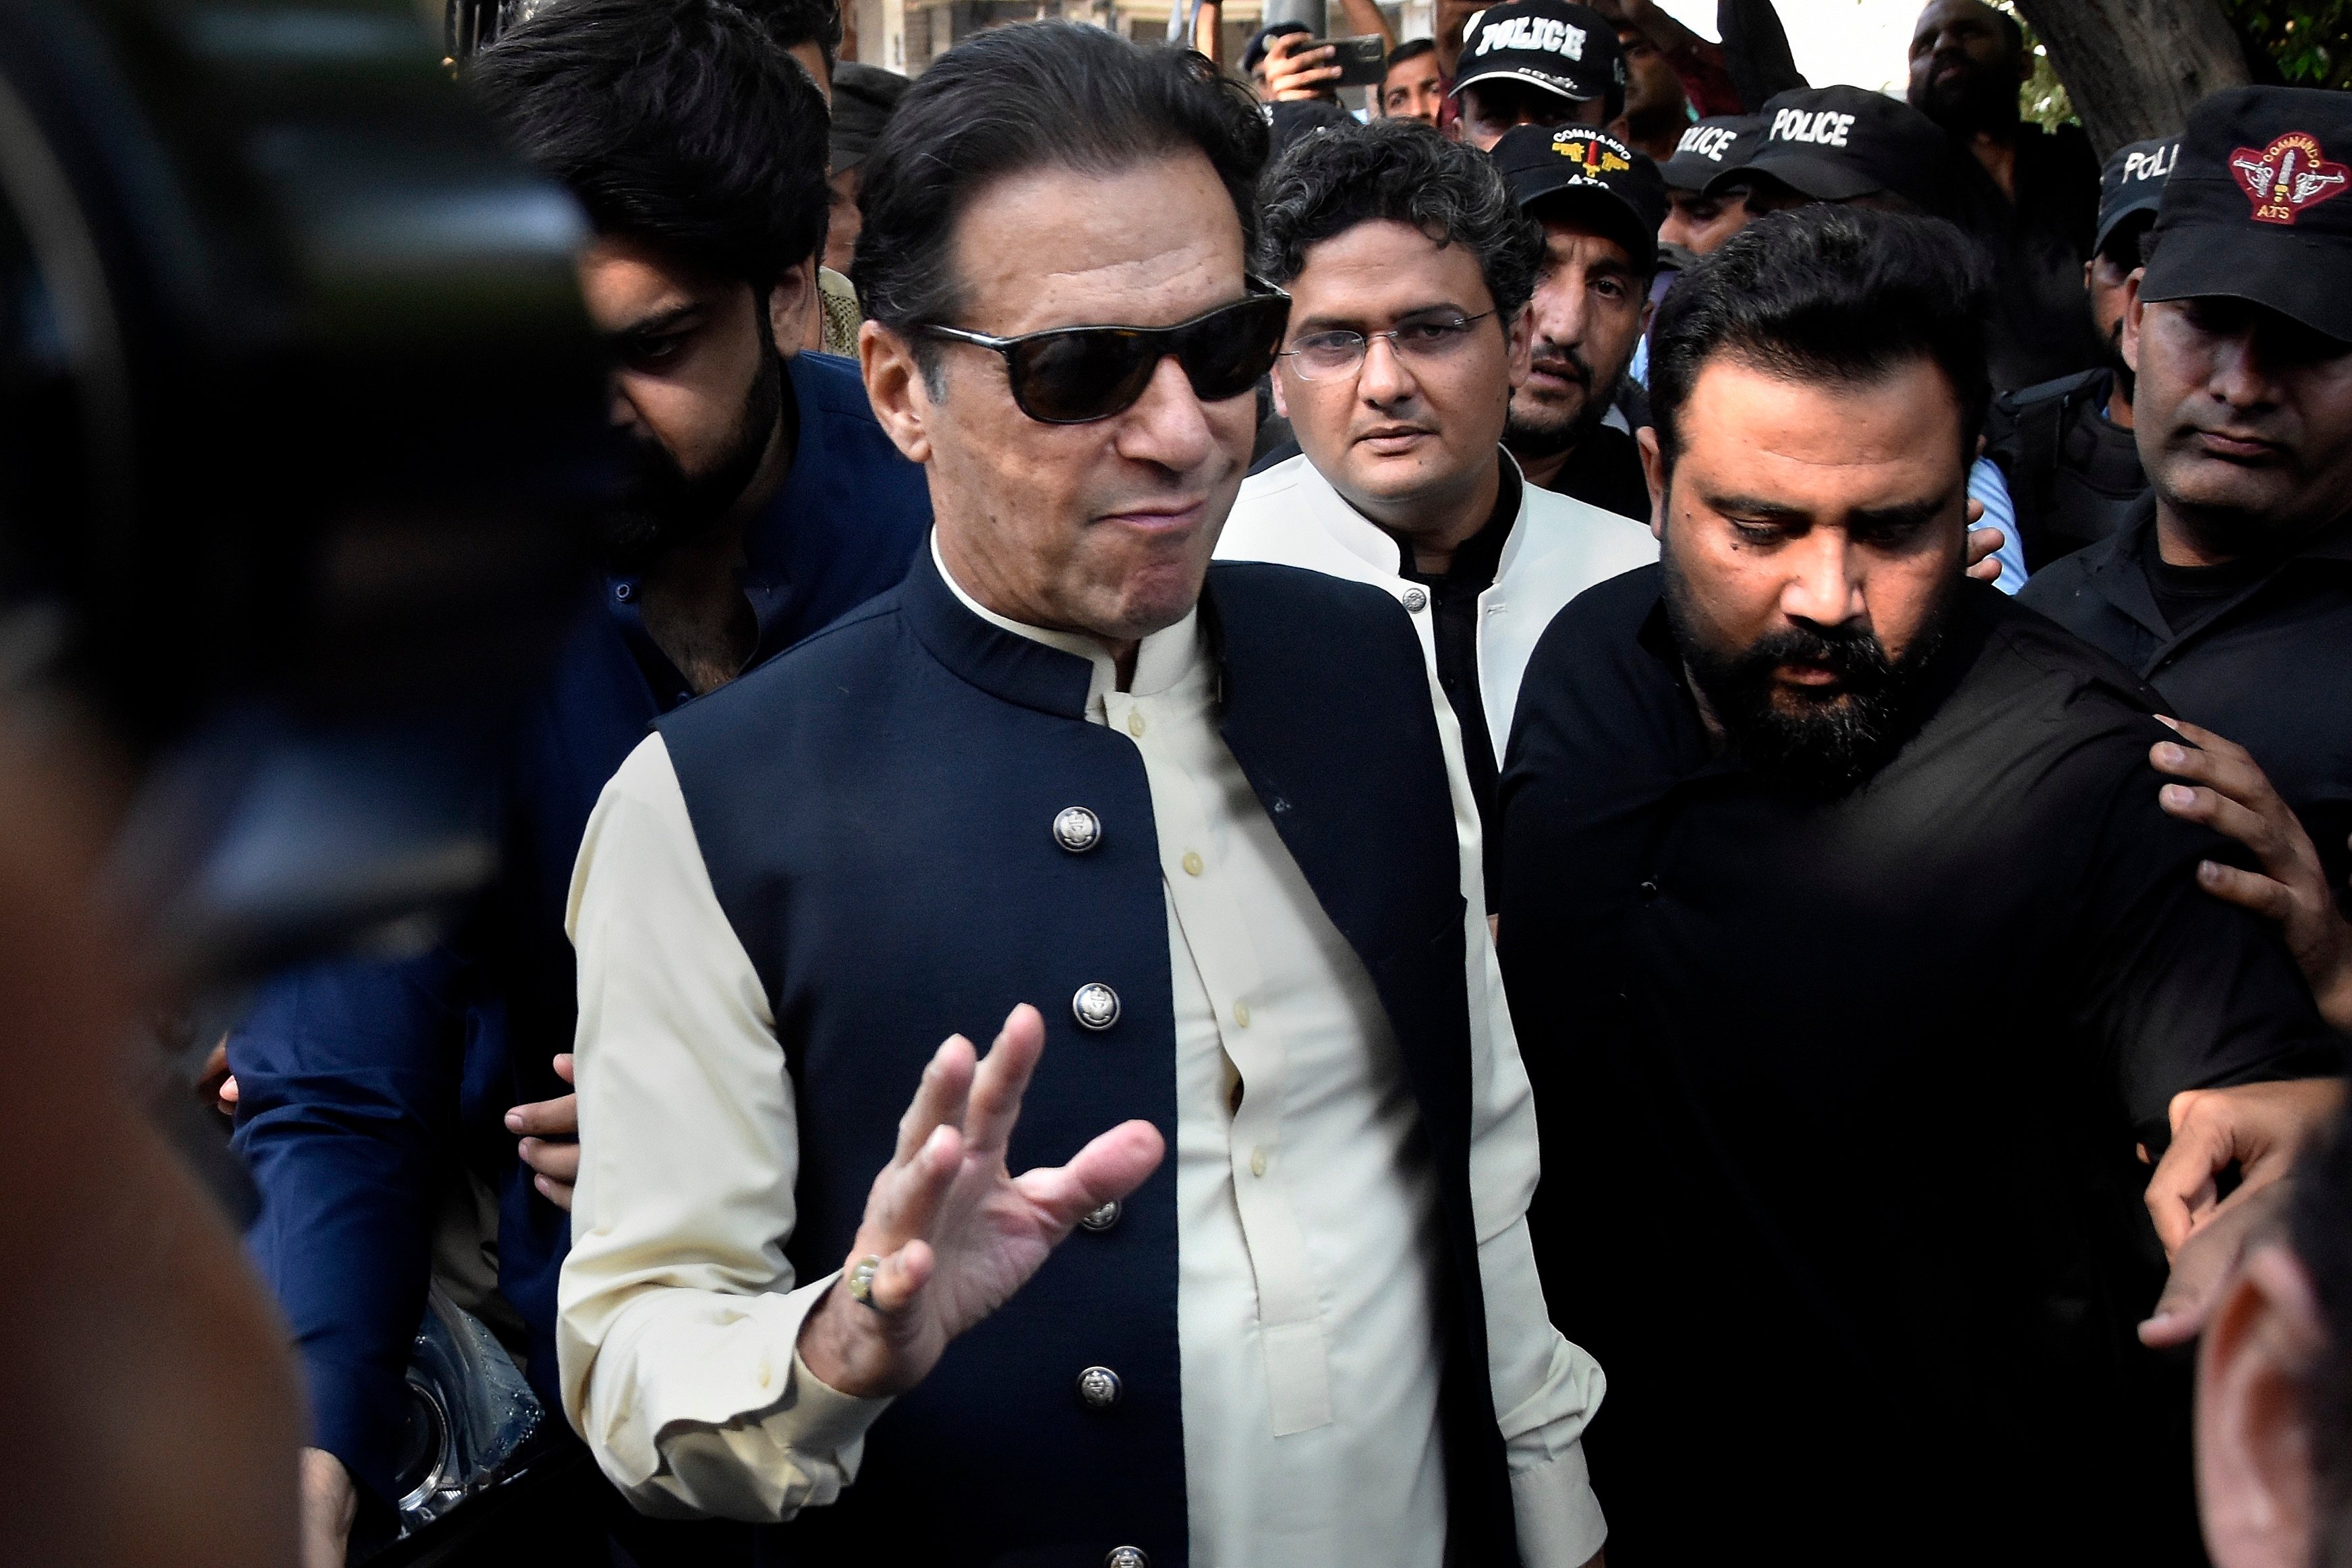 Former Pakistani Prime Minister Imran Khan wrote an apology in a contempt case stemming from his outburst against a female judge. Photo: AP